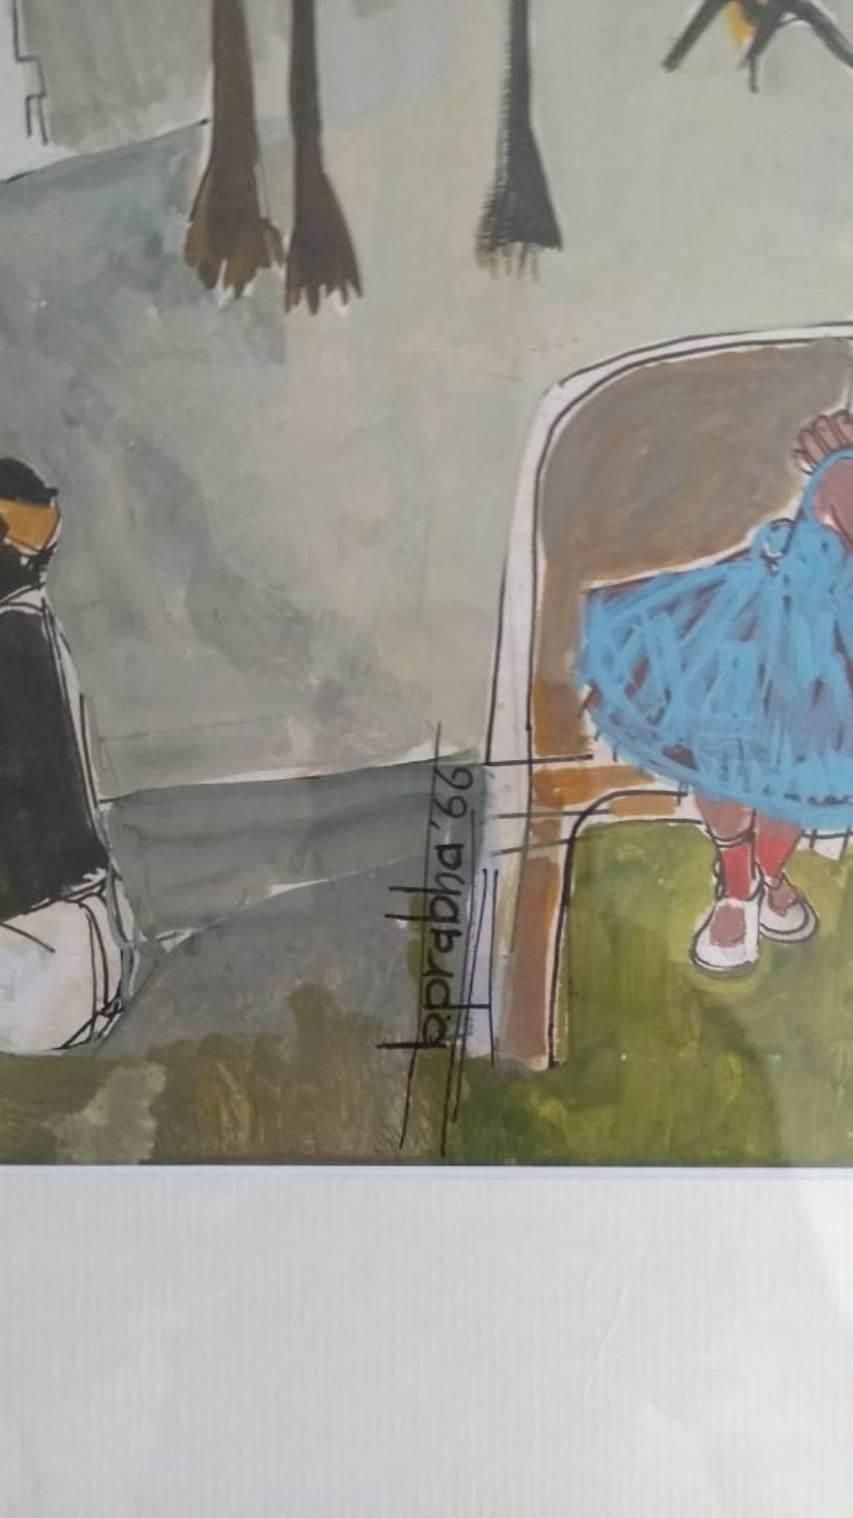 B. Prabha - Untitled - 36 x 12 inches (unframed size)
Gouache on board
Inclusive of shipment in roll form.

Style : Although she worked mostly with oils on canvas, this modern painter did explore several media, styles and subjects before finally